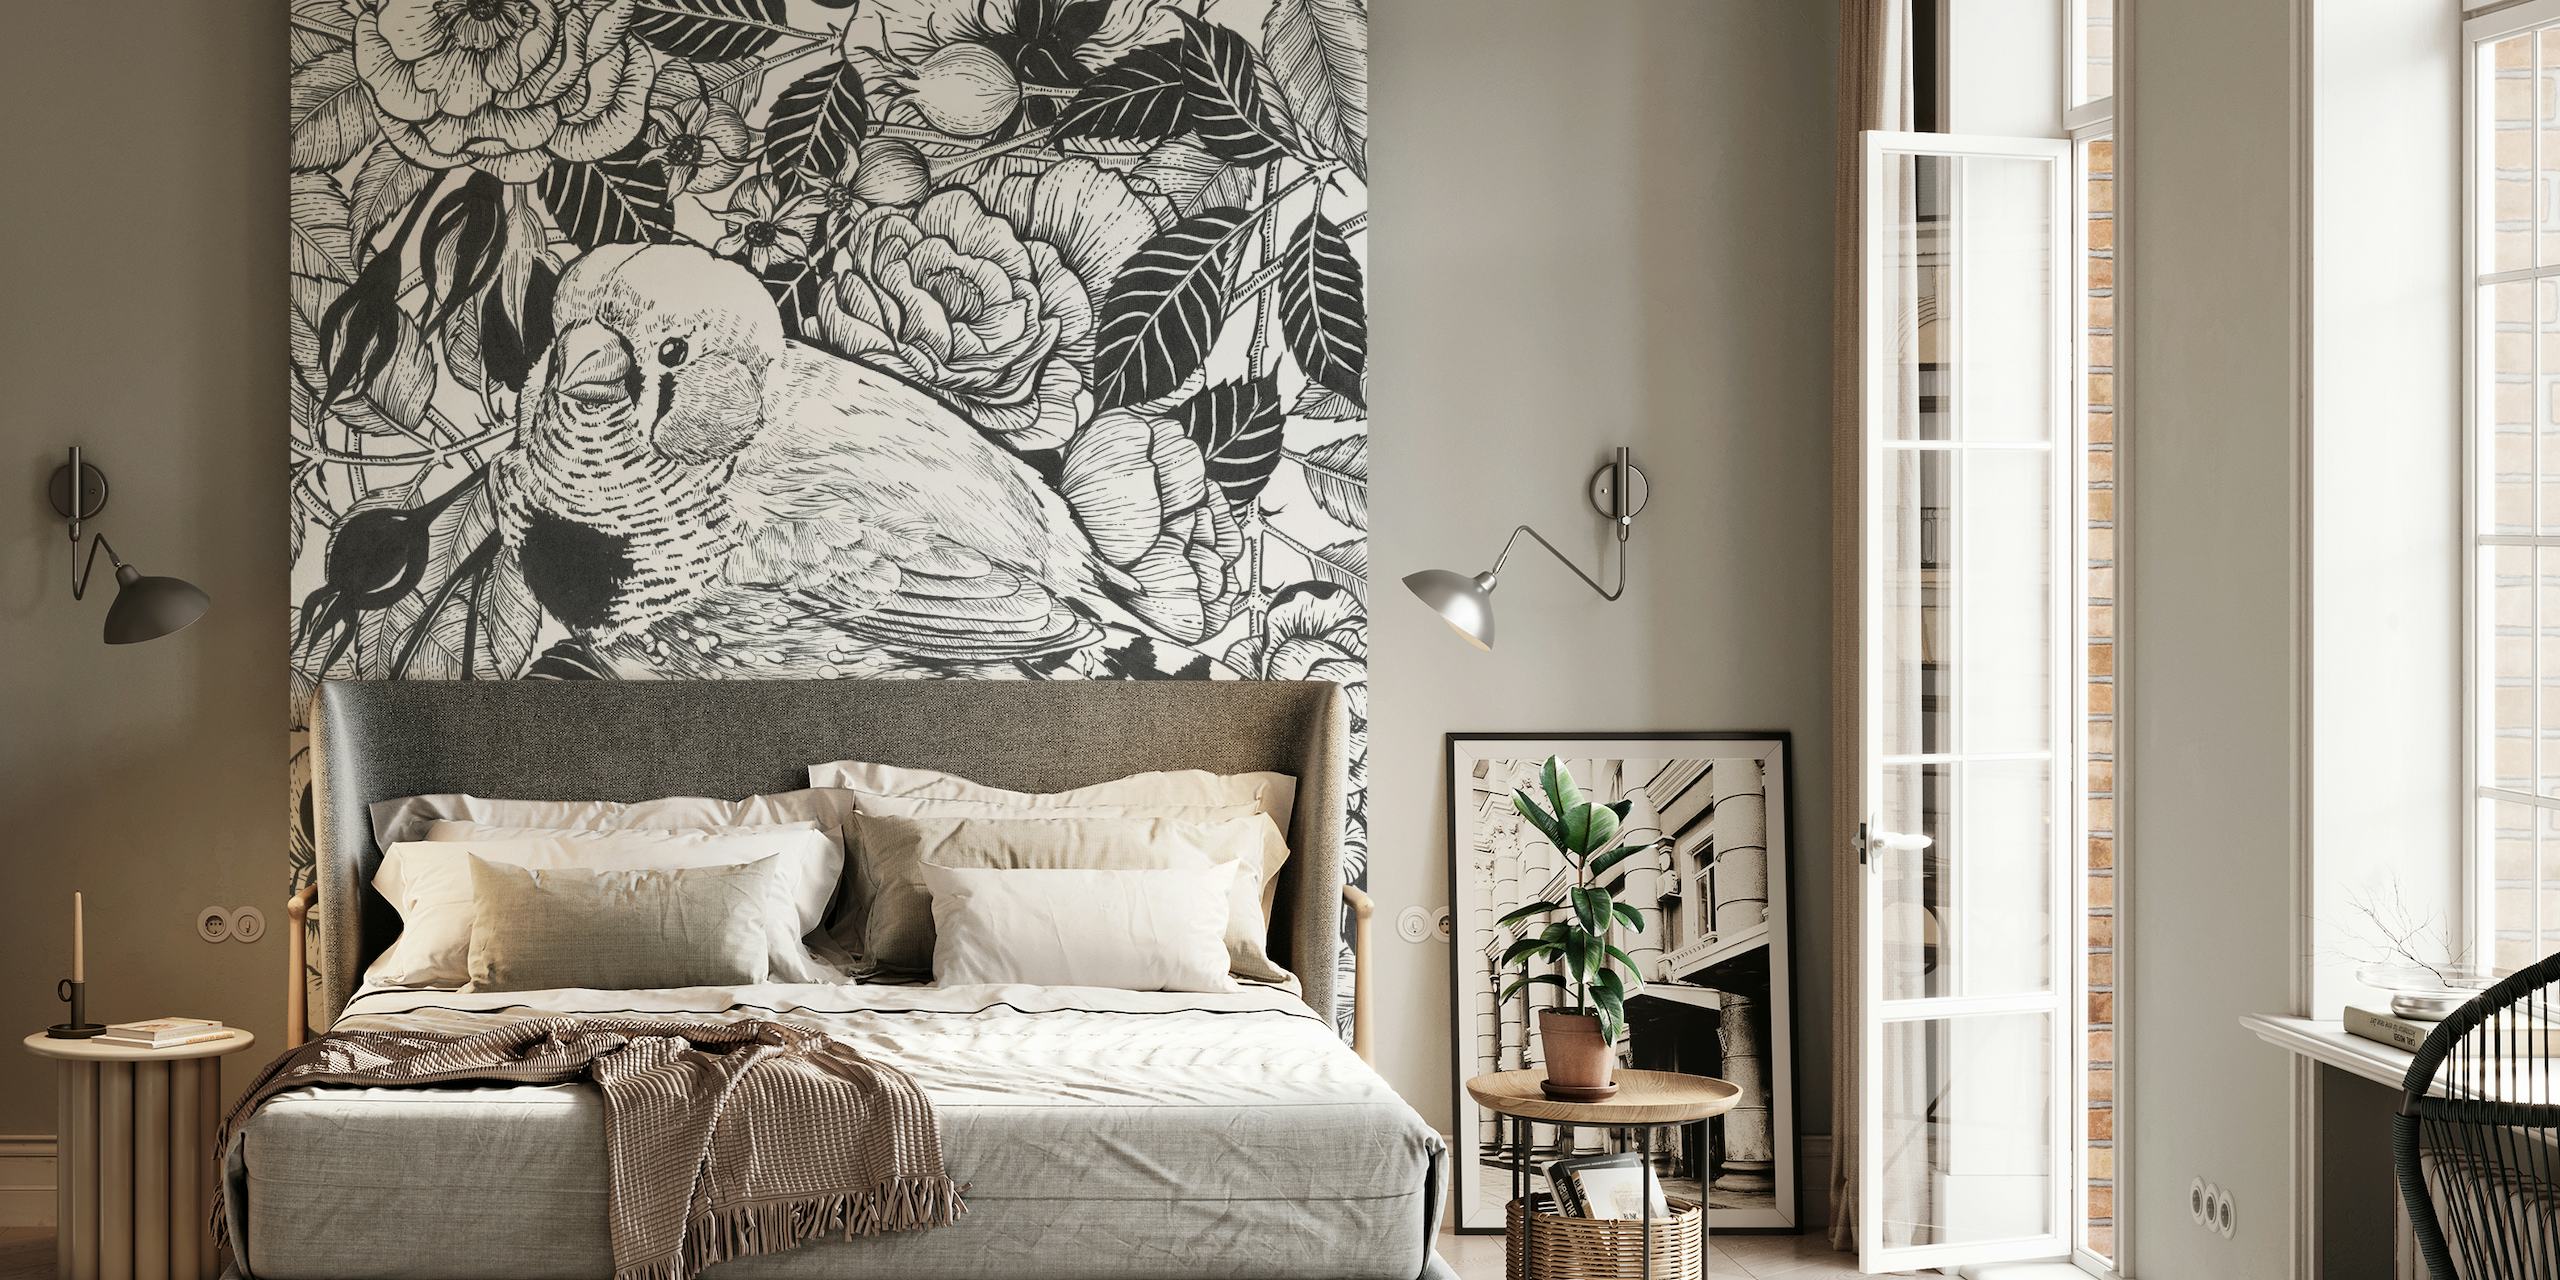 Ink drawing of a zebra finch among floral patterns wall mural